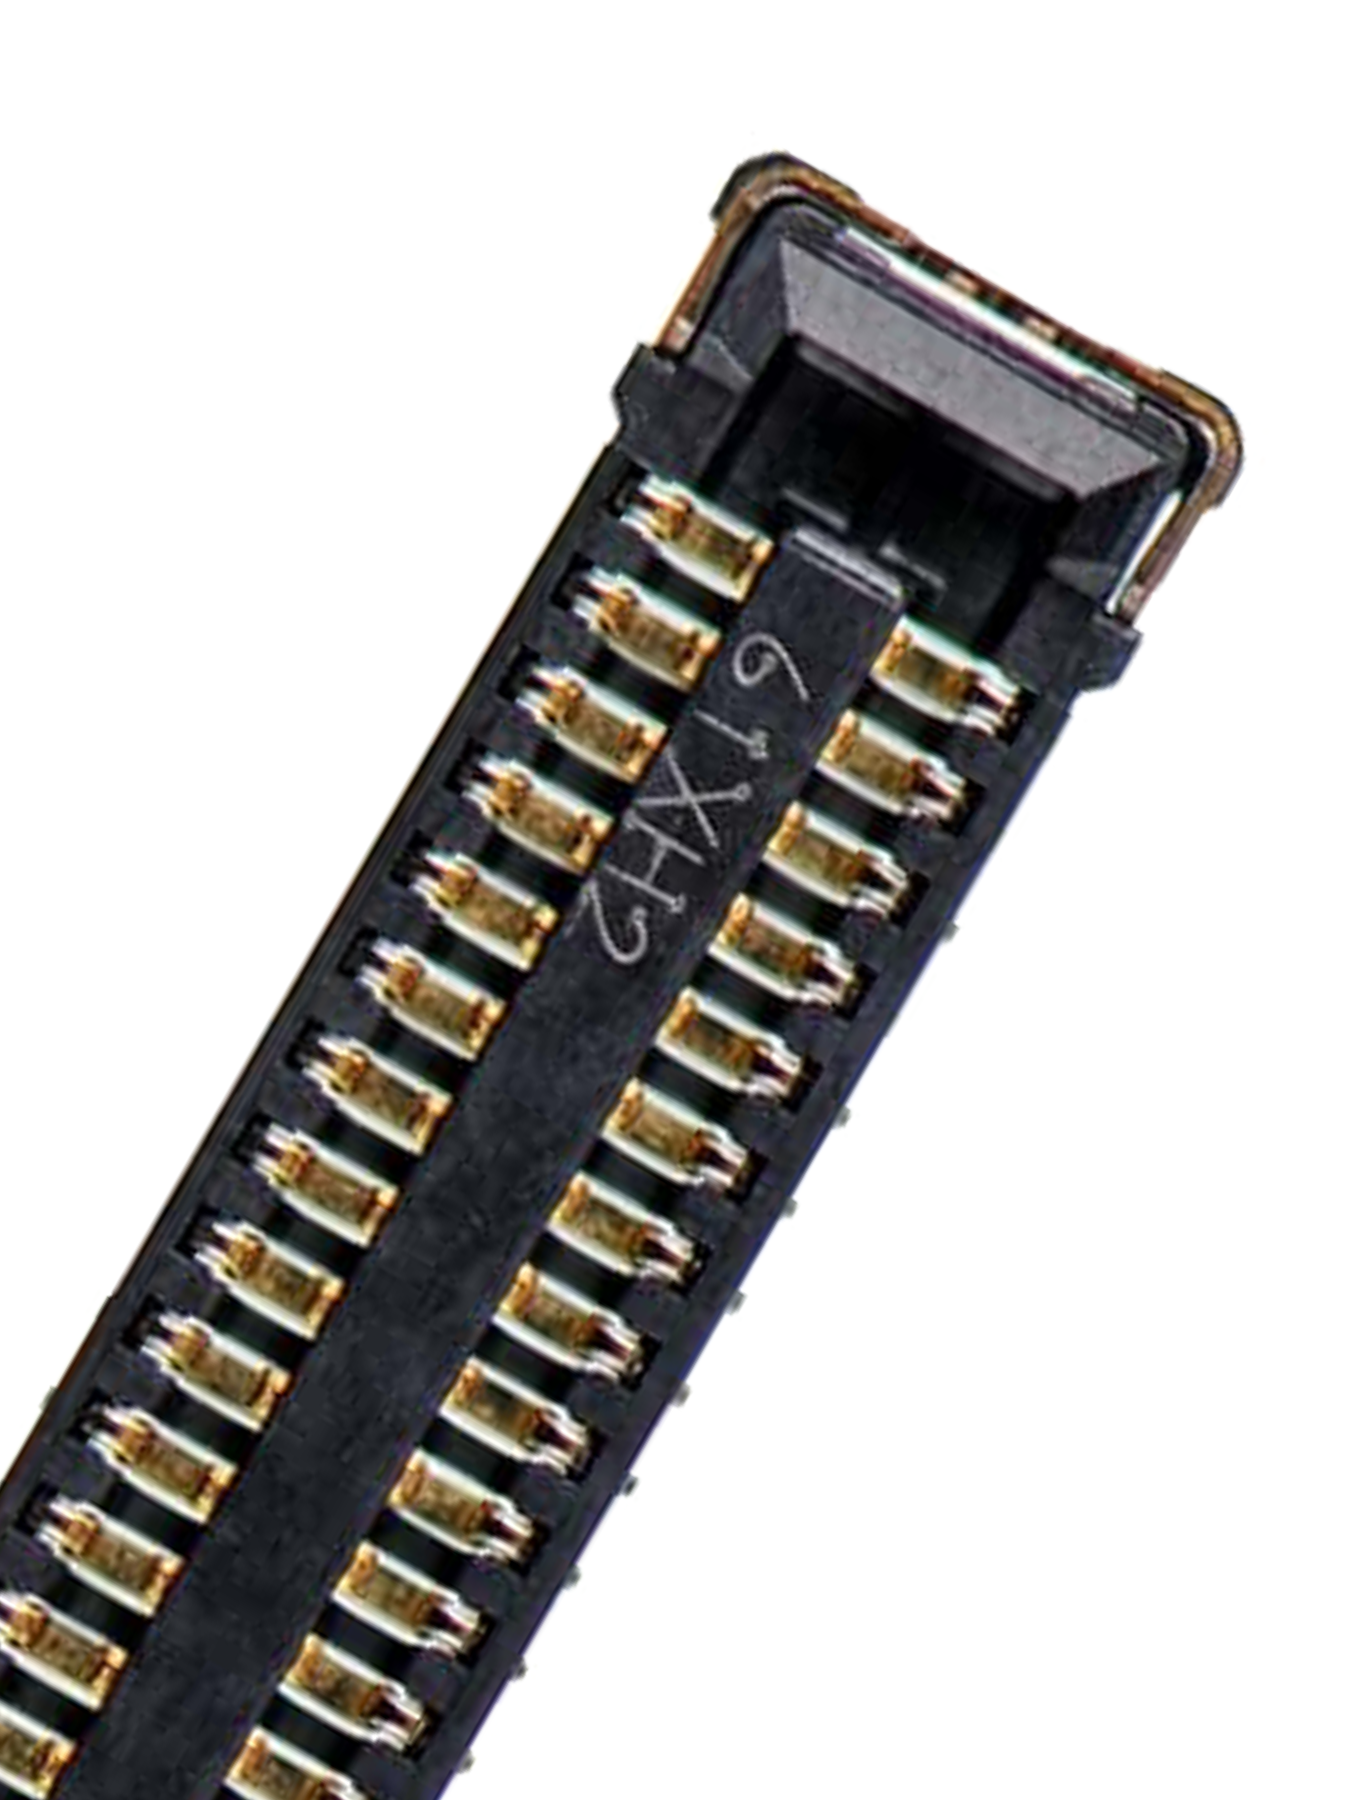 LCD (ON THE MOTHERBOARD) FPC CONNECTOR (42 PIN) FOR IPAD PRO 12.9" 1ST GEN / 2ND GEN (2015)